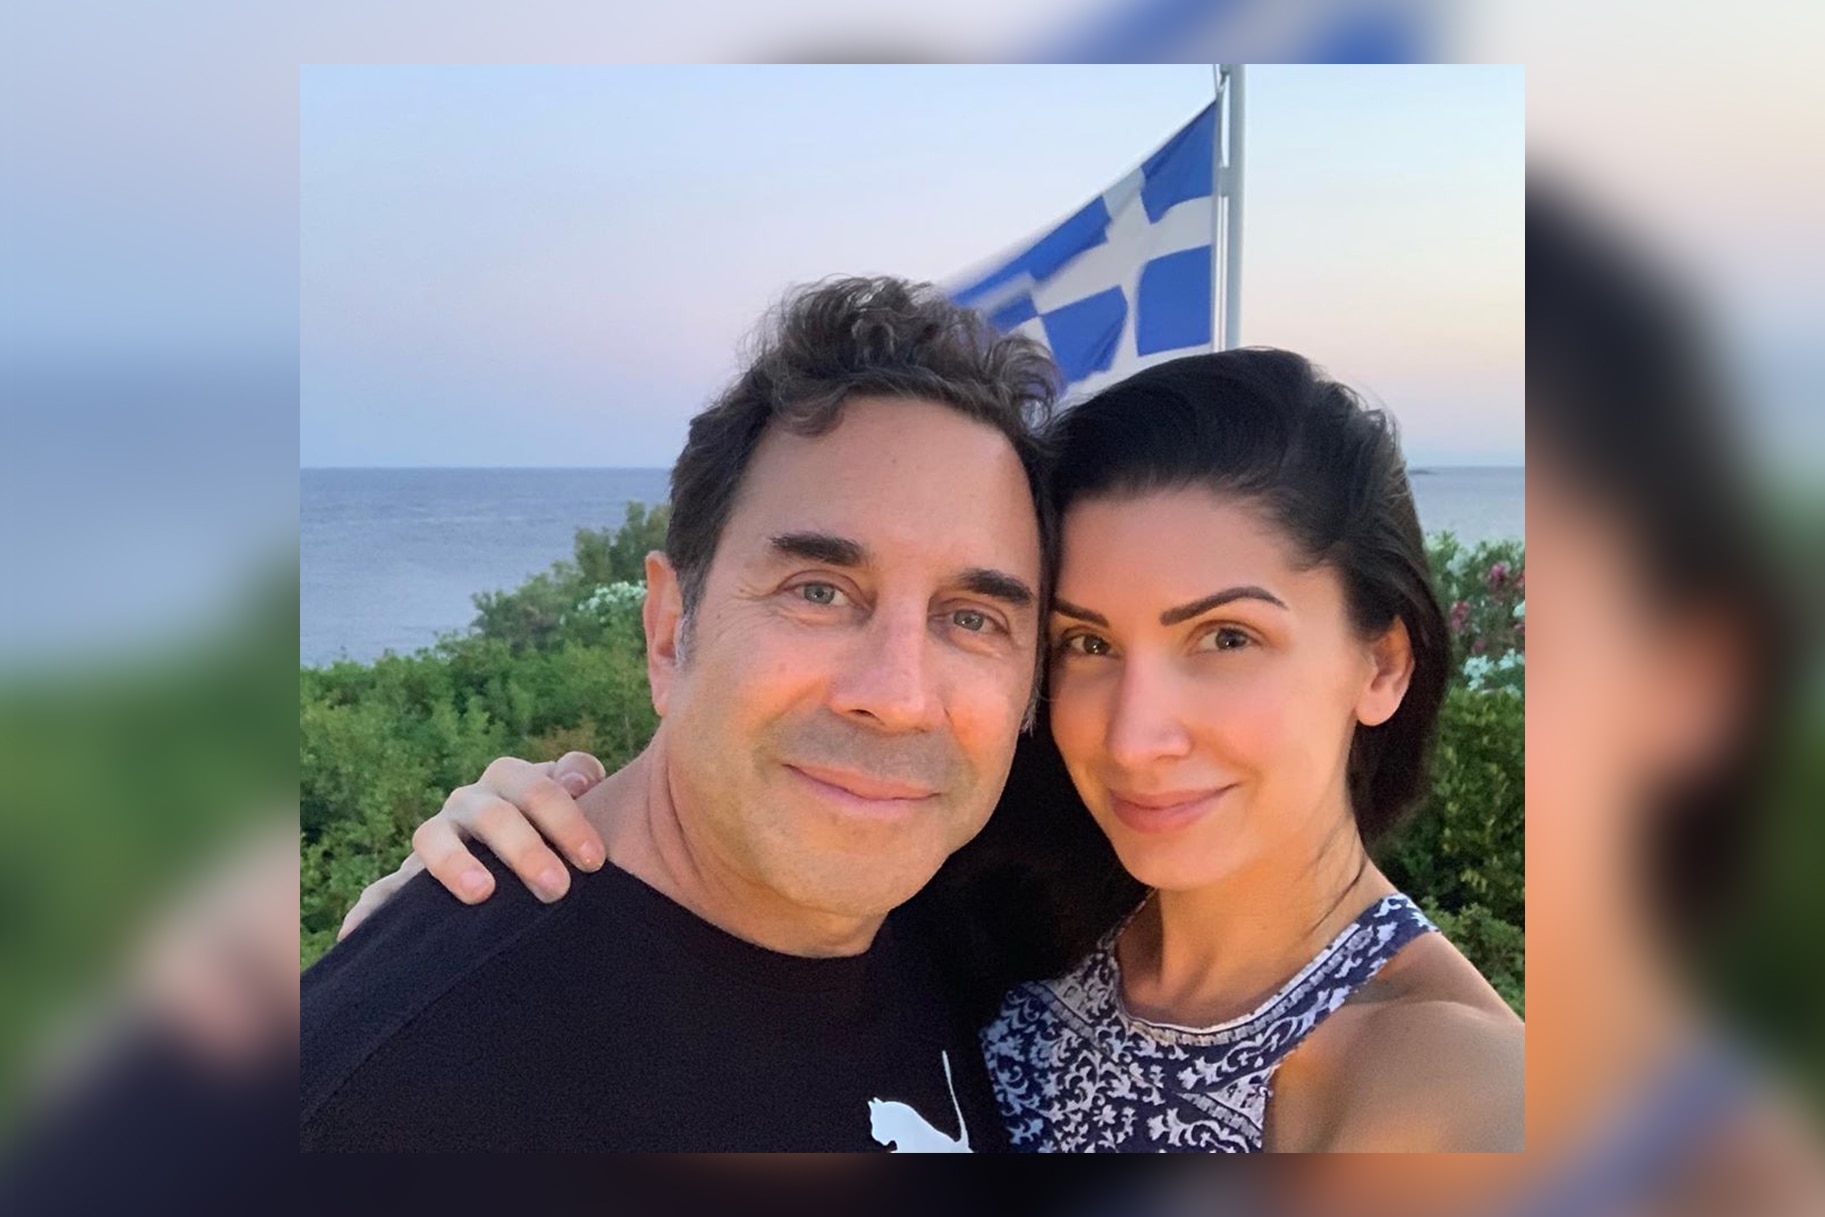 Paul Nassif Brittany Holiday Photos